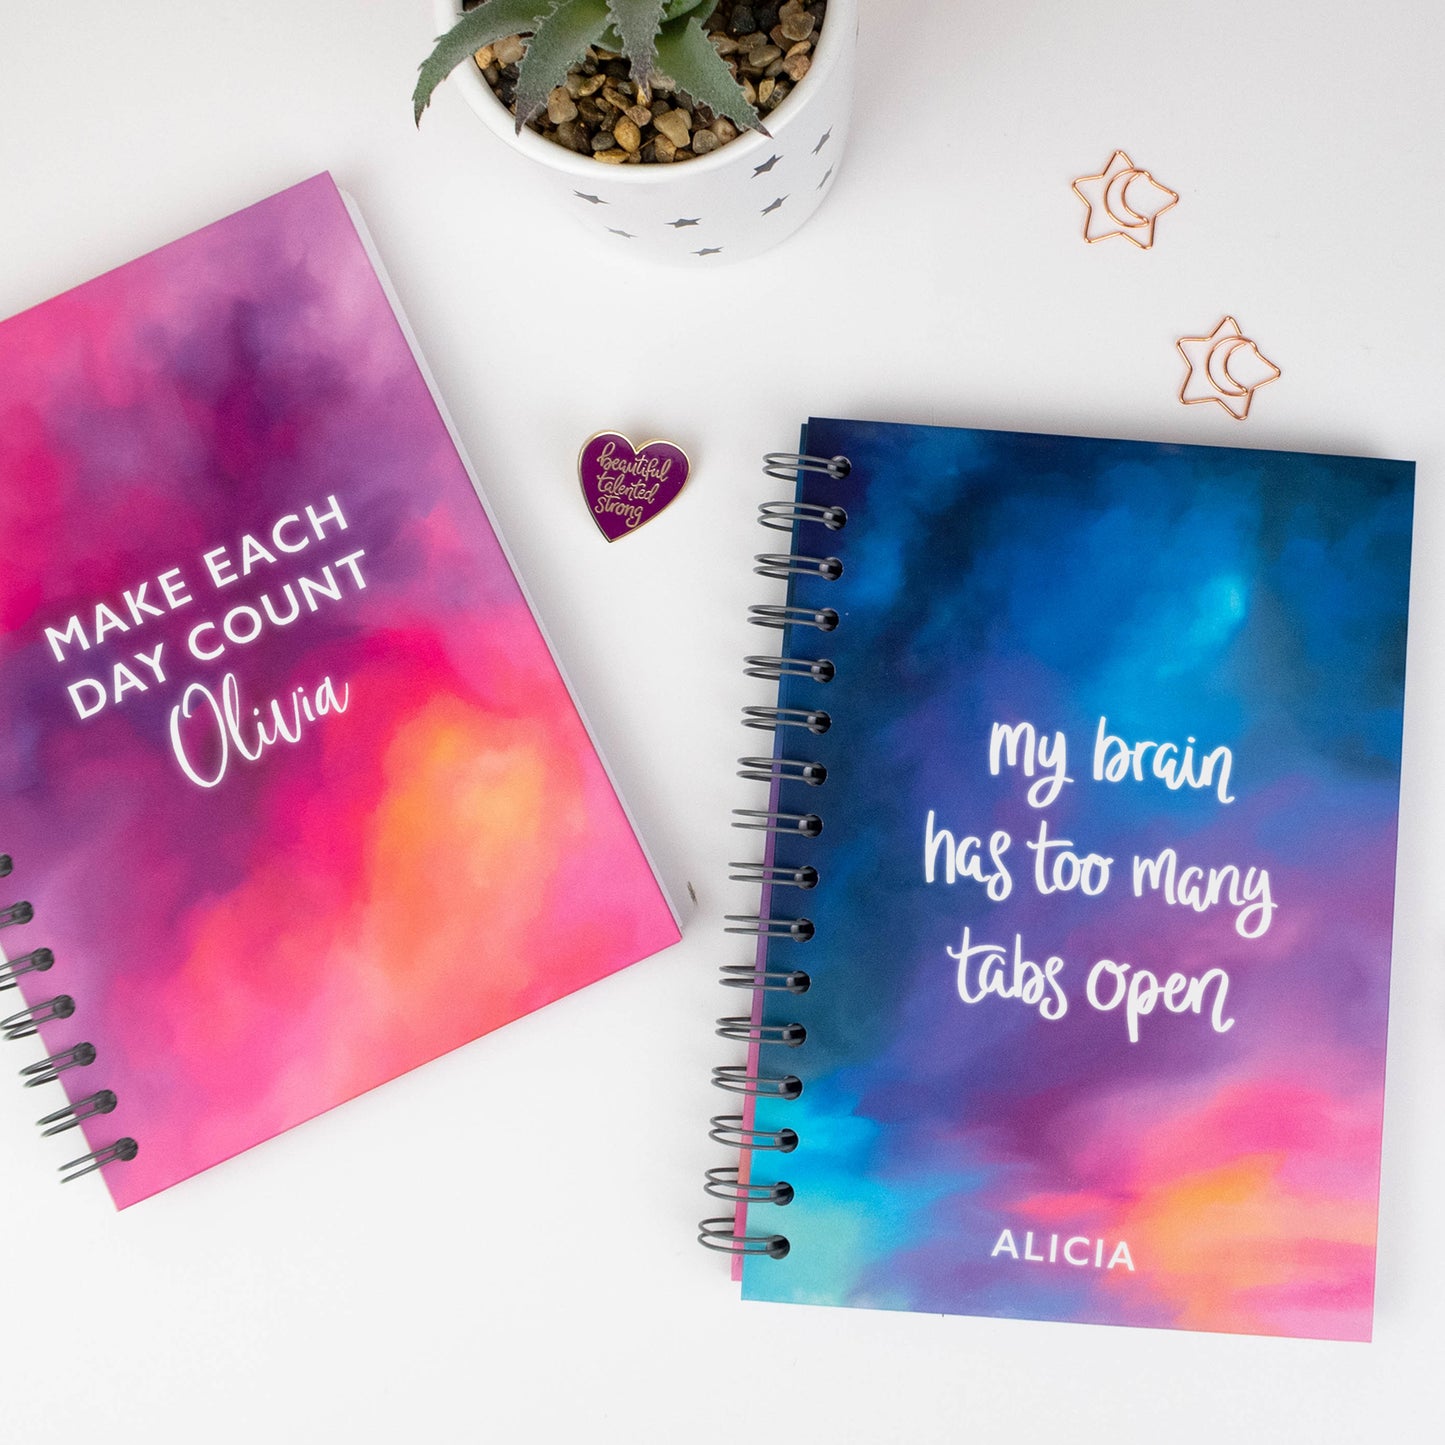 MAKE EACH DAY COUNT - LUXE PERSONALISED NOTEBOOK